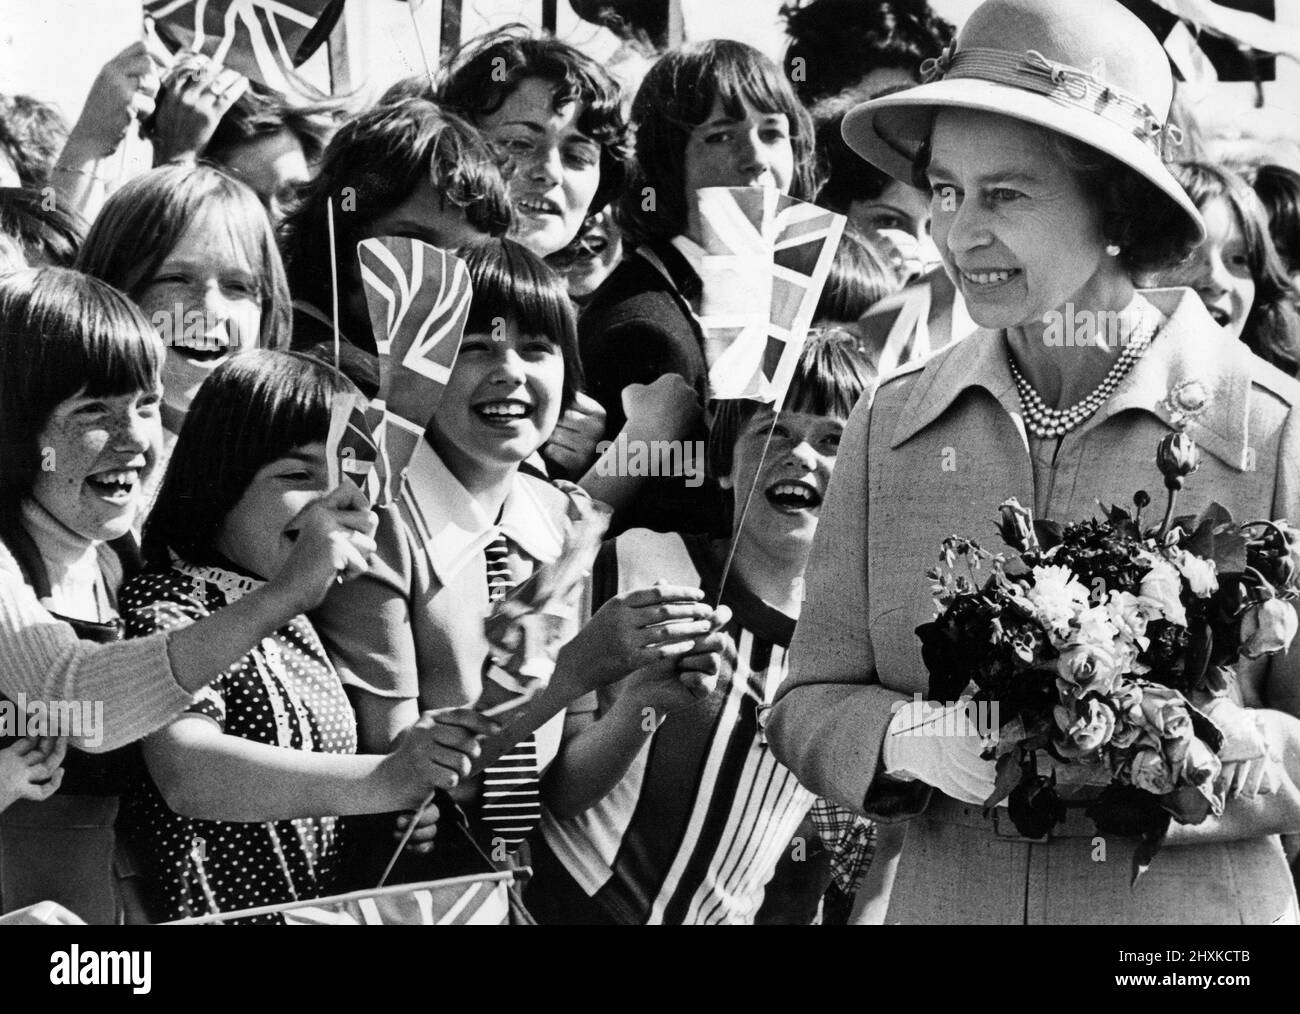 Celebrate silver jubilee Black and White Stock Photos & Images - Alamy